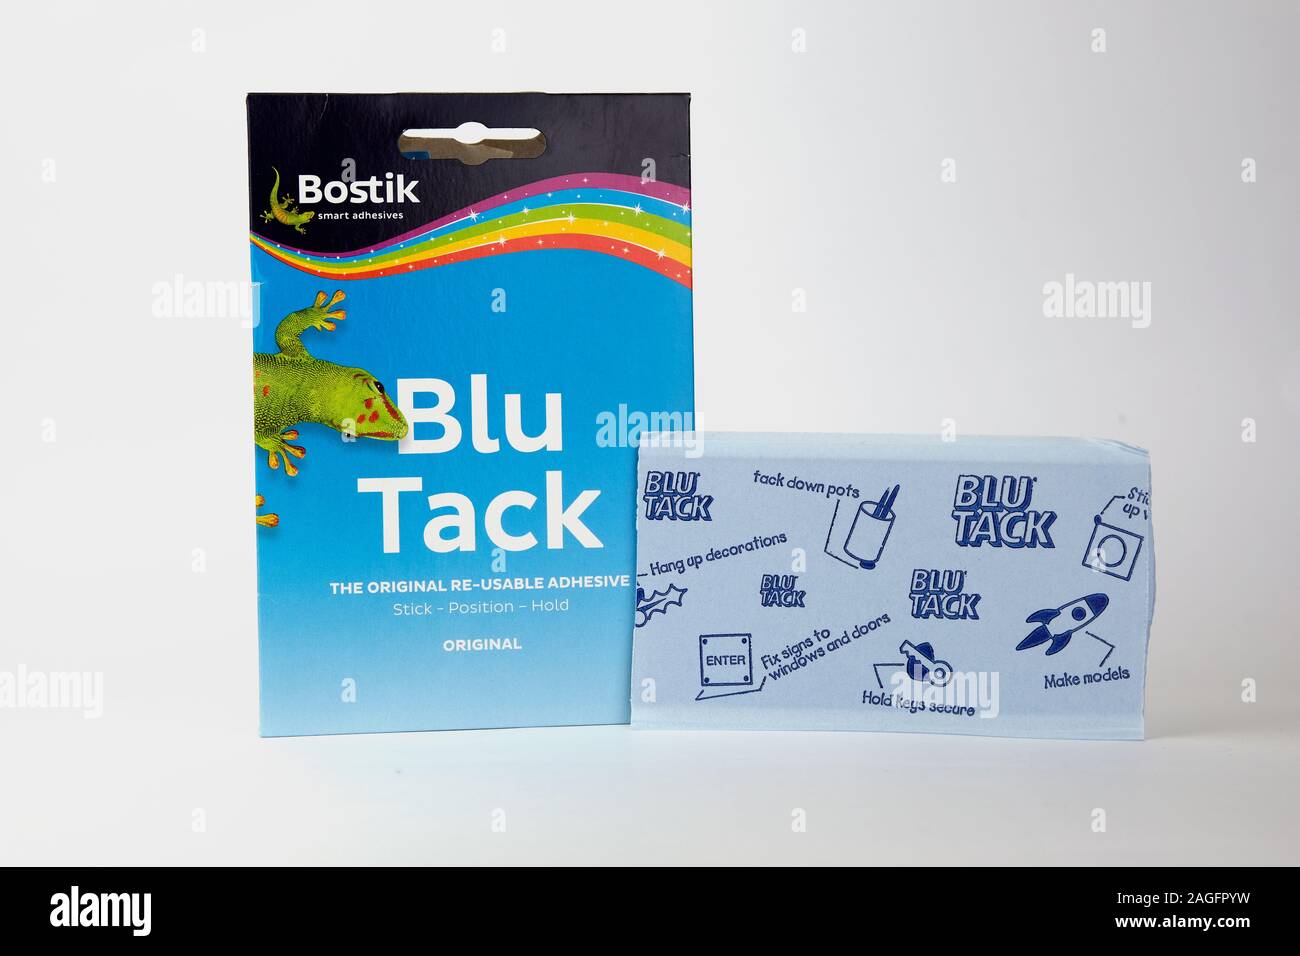 Blu Tack in the retail package. Popular adhesive paste commonly used to attach lightweight objects to walls. Stock Photo